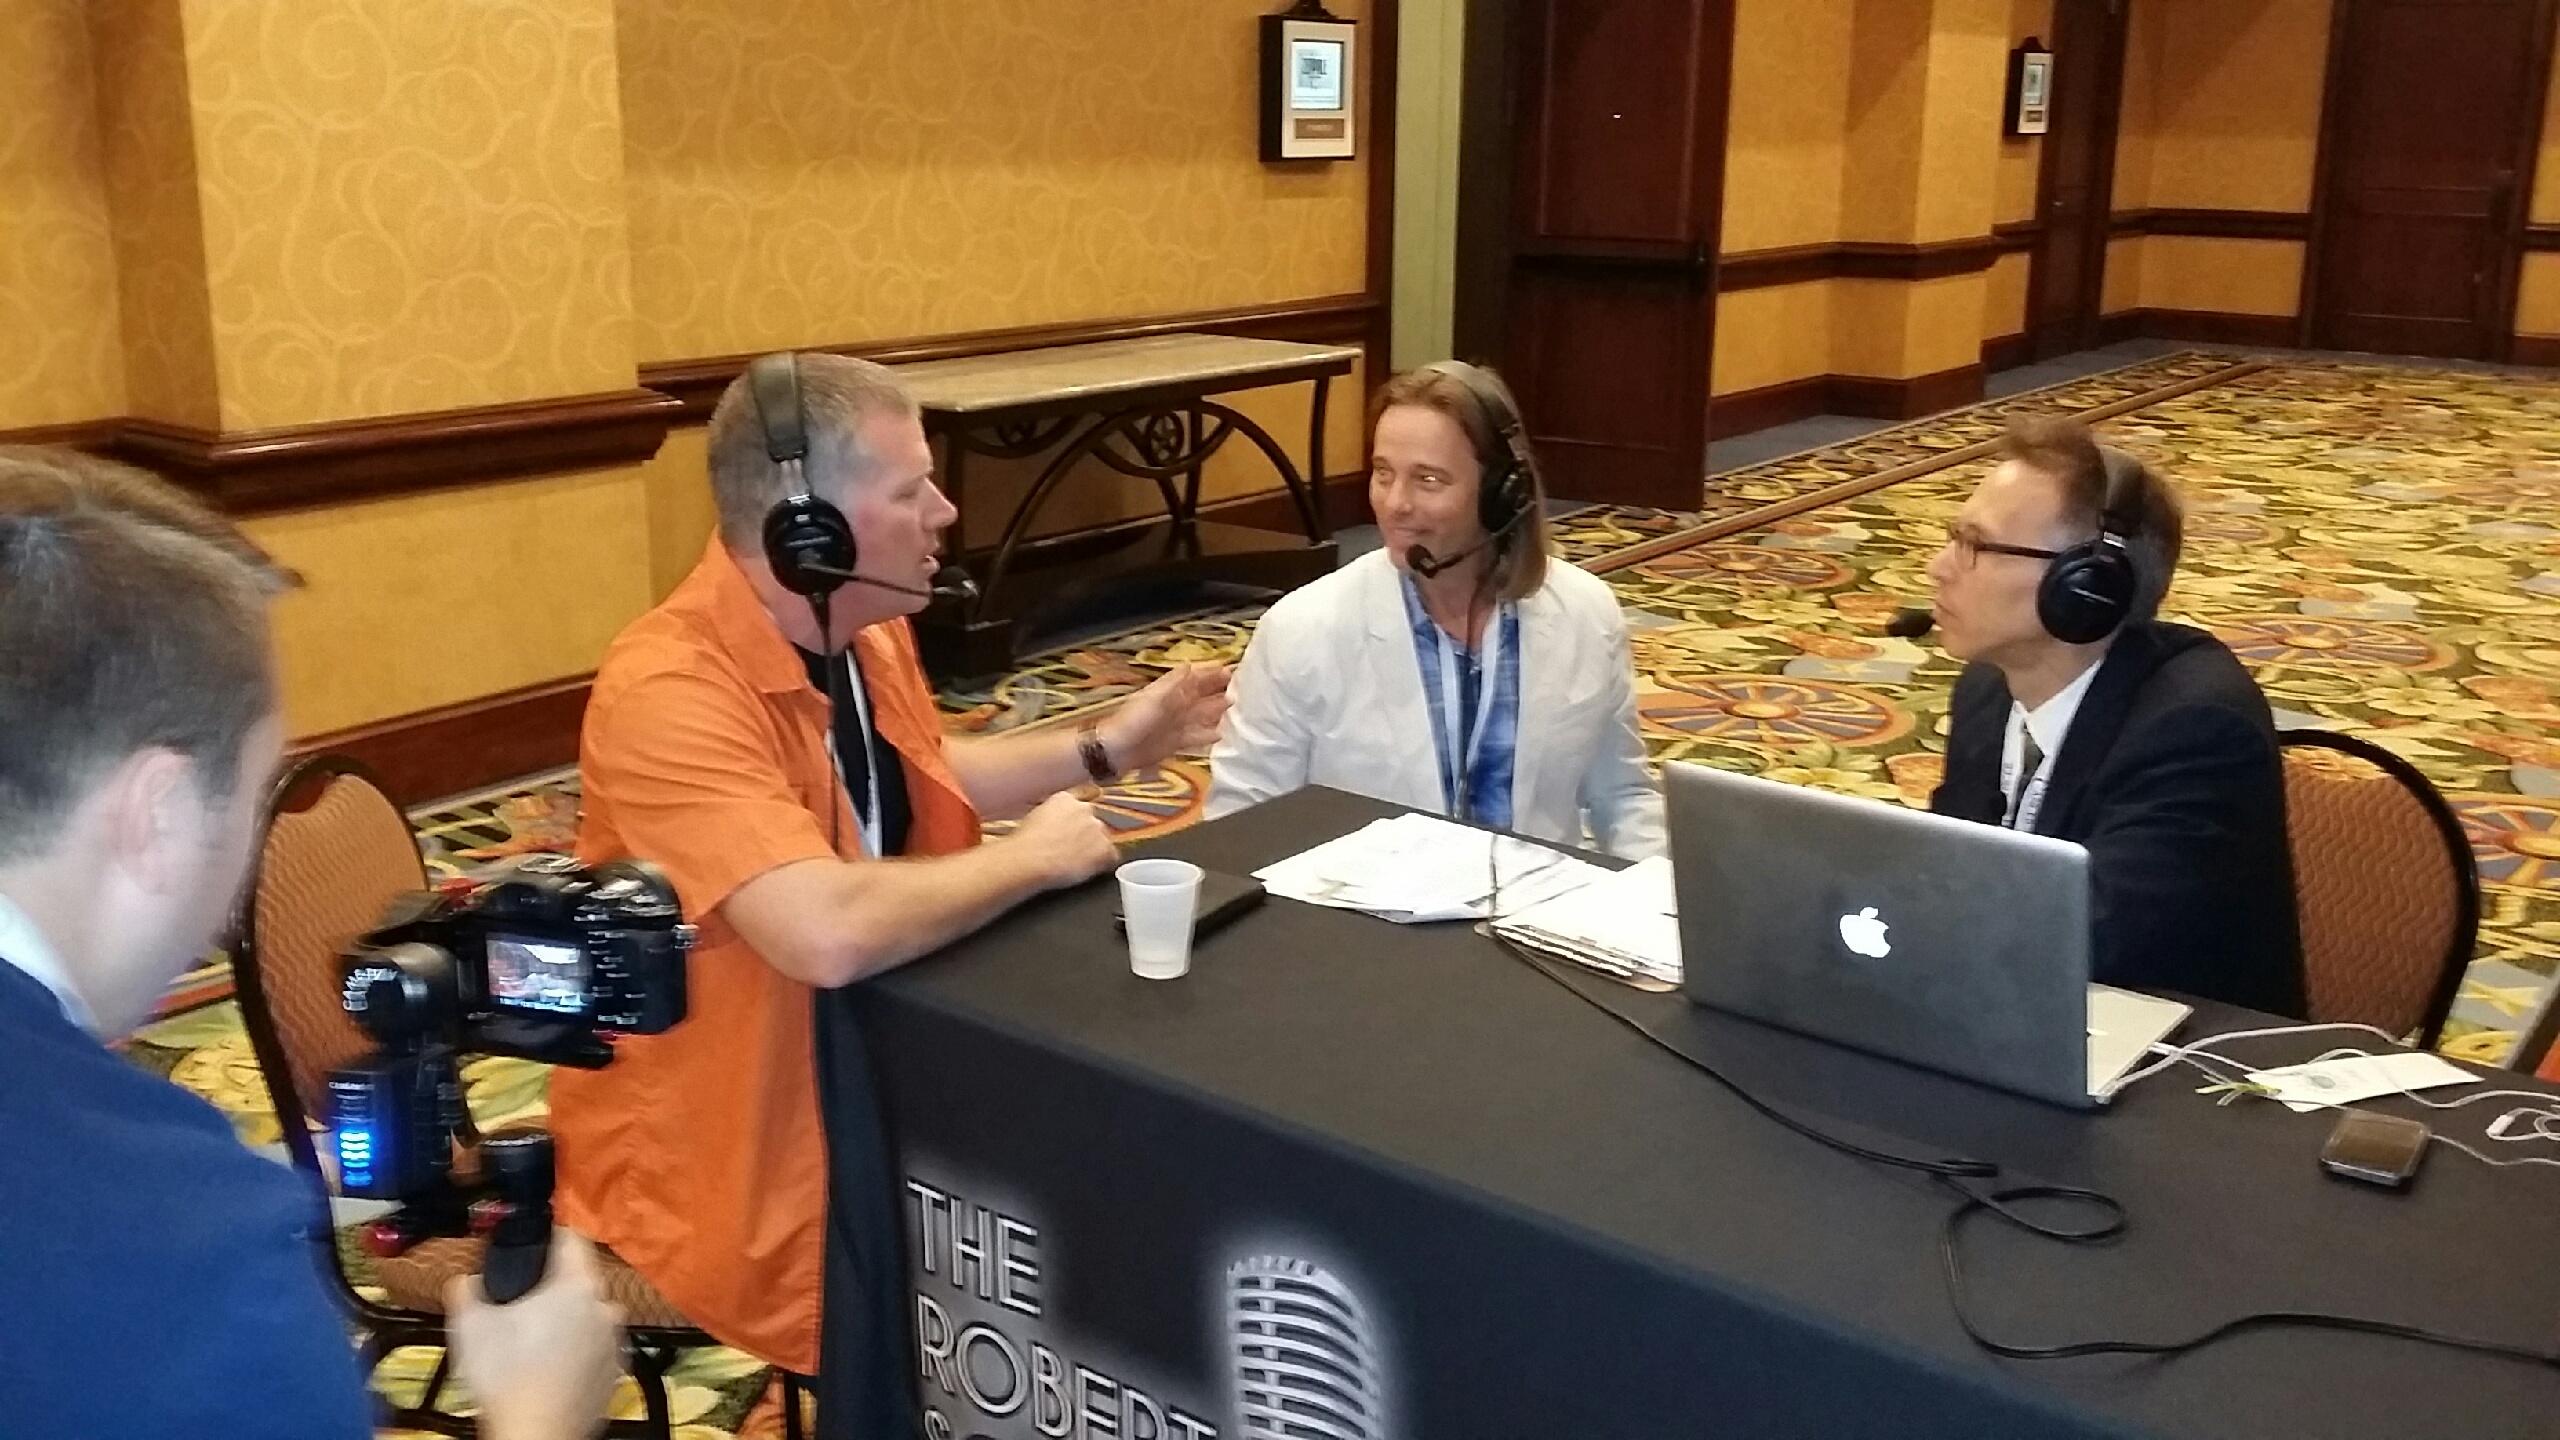 Dr. Group, DC was featured in a radio interview with Mike Adams and Scott Bell at The Truth About Cancer Symposium.